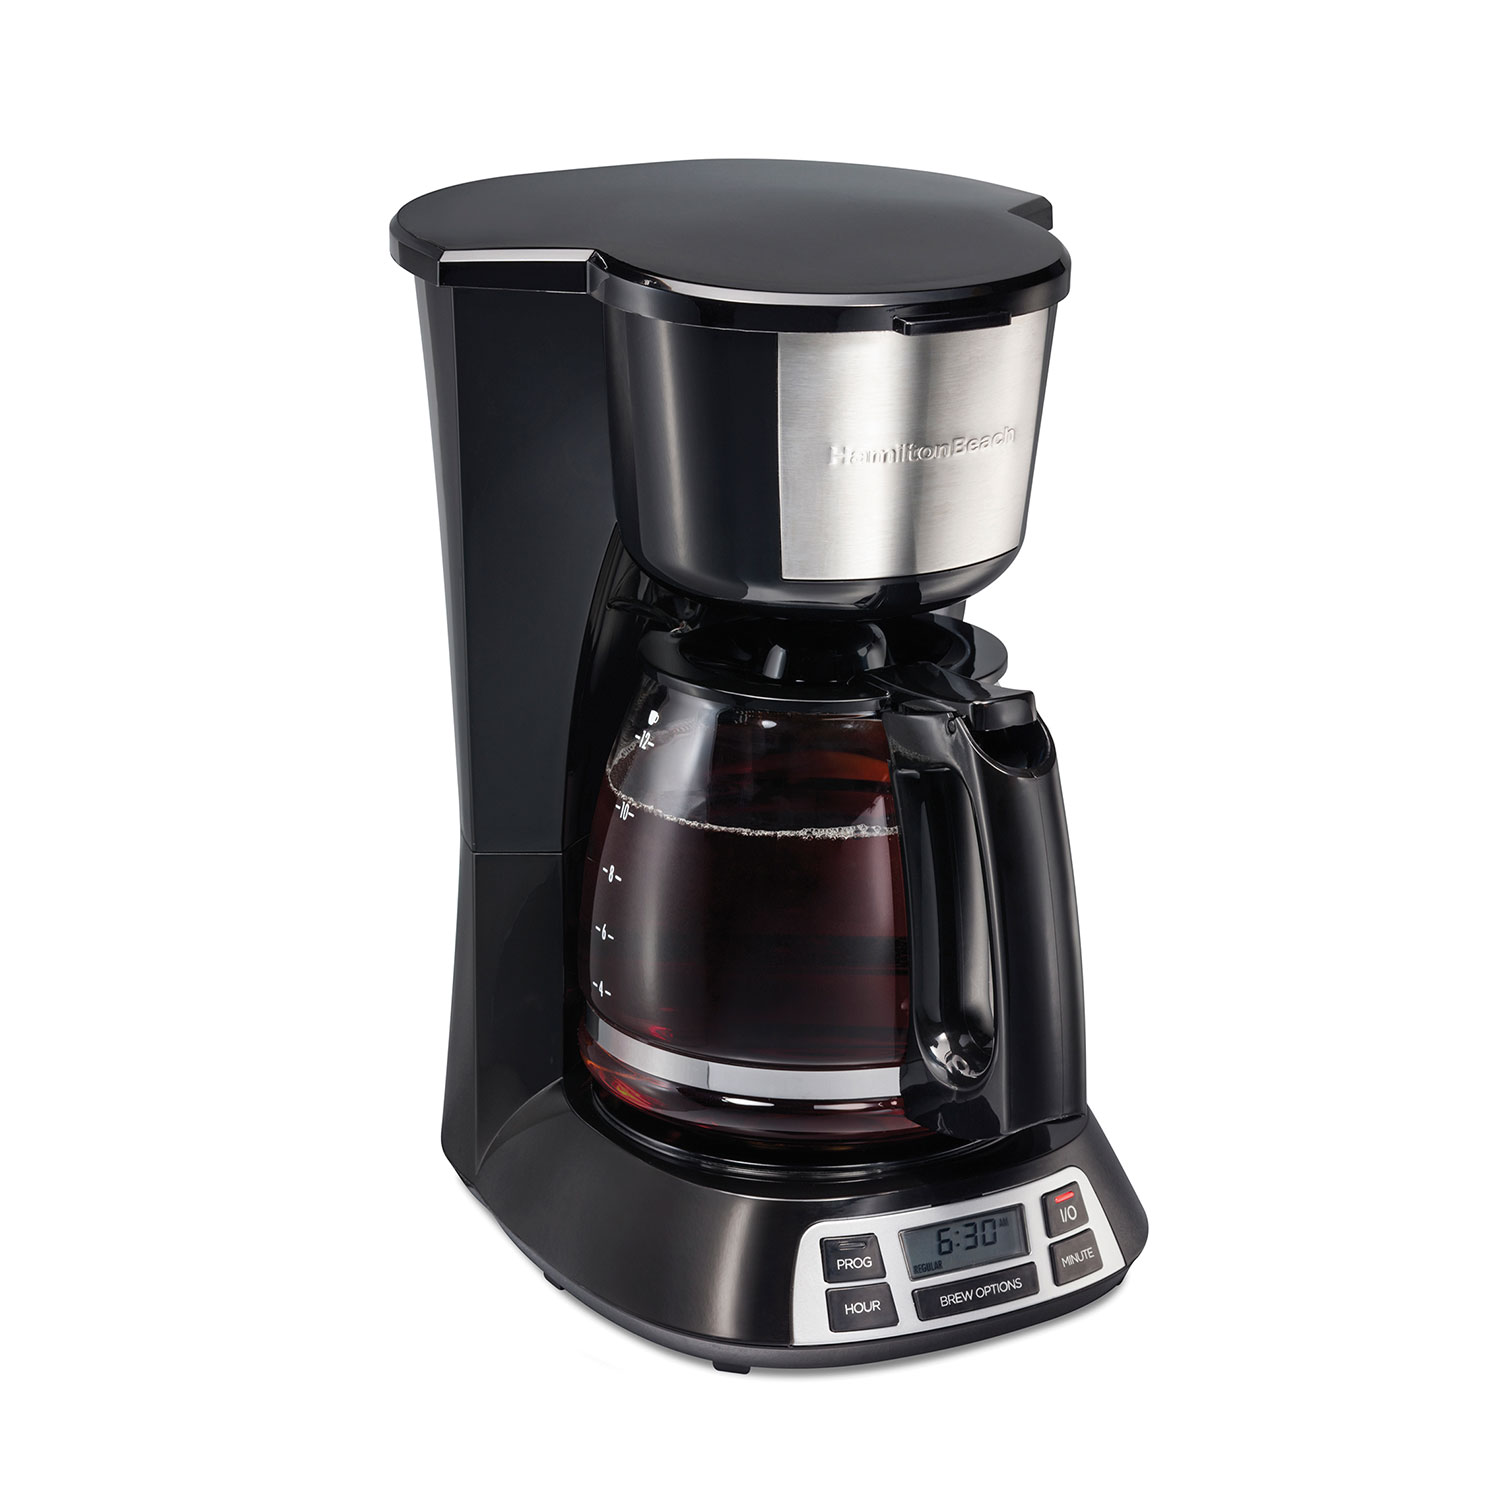 12 Cup Programmable Coffee Maker, Stainless Steel Accents (49630)